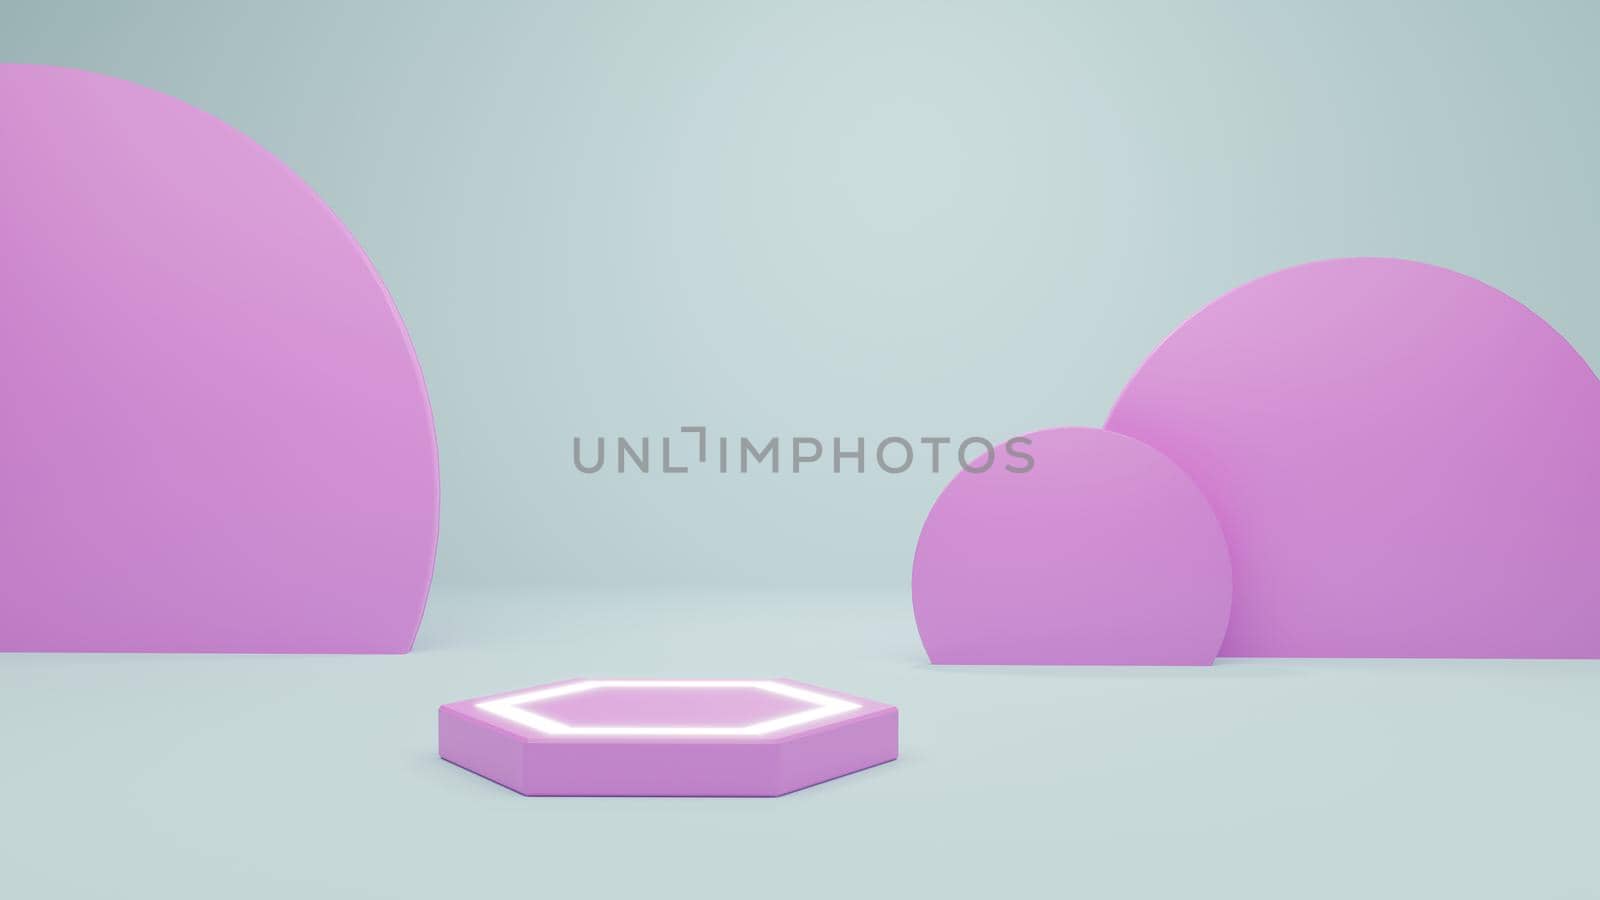 Abstract Geometric 3D Rendering Circle Cylinder Podium Background. Minimalism Pastel Colored Still Life Style